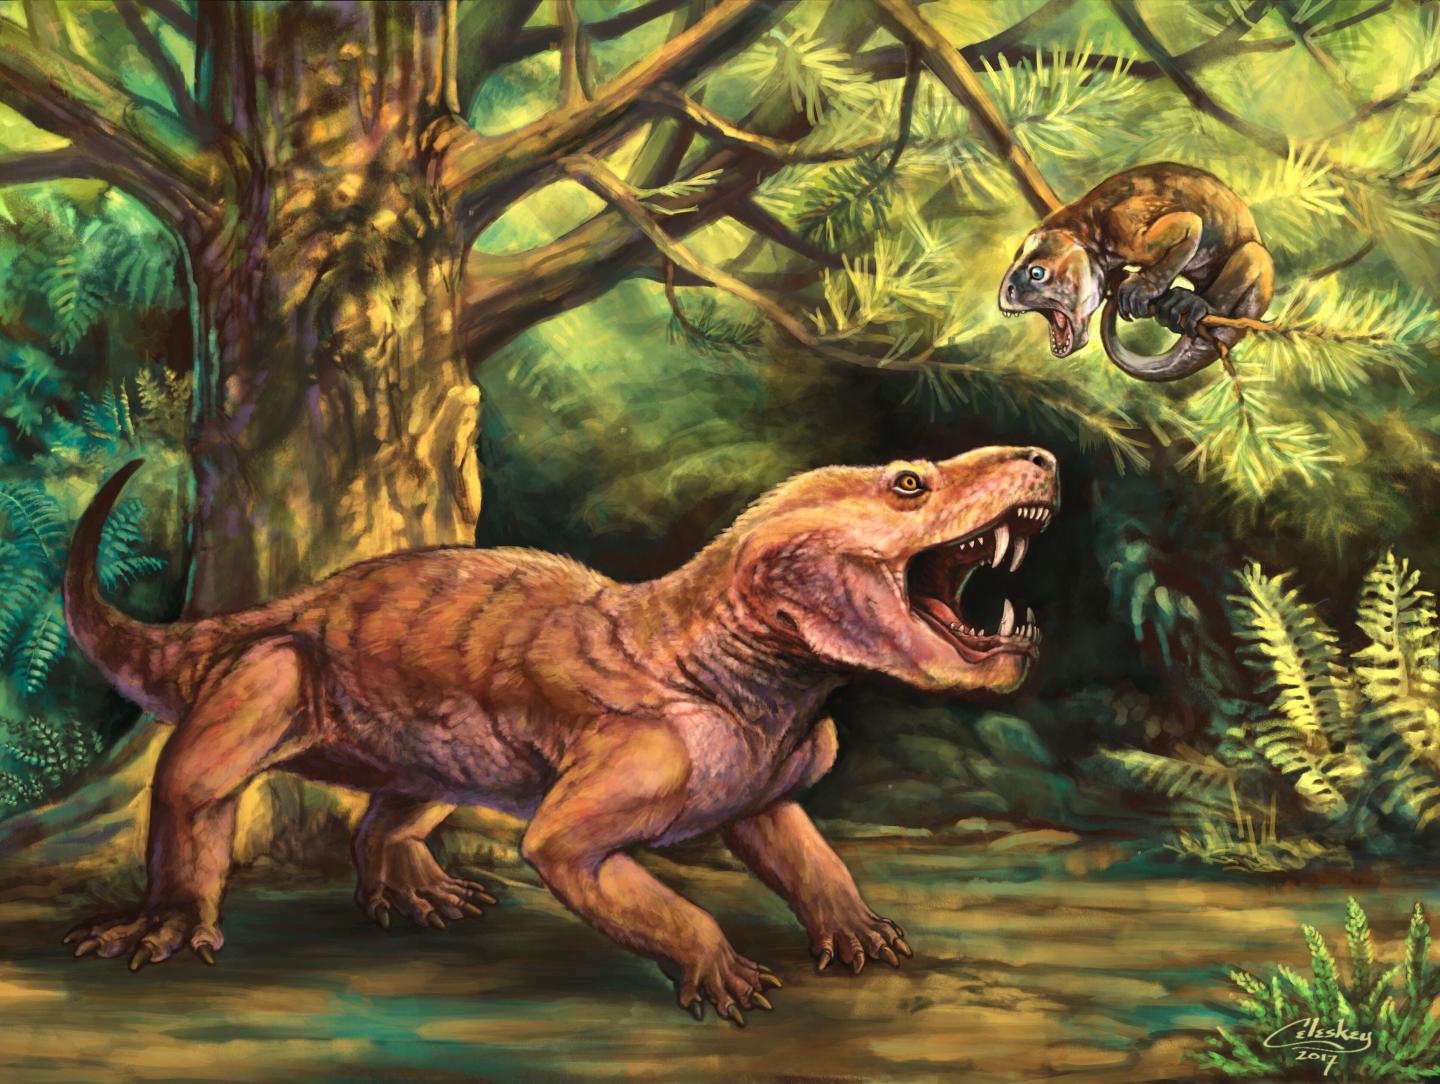 Eight Menacing Saber-Toothed Creatures That Stalked the Earth Long